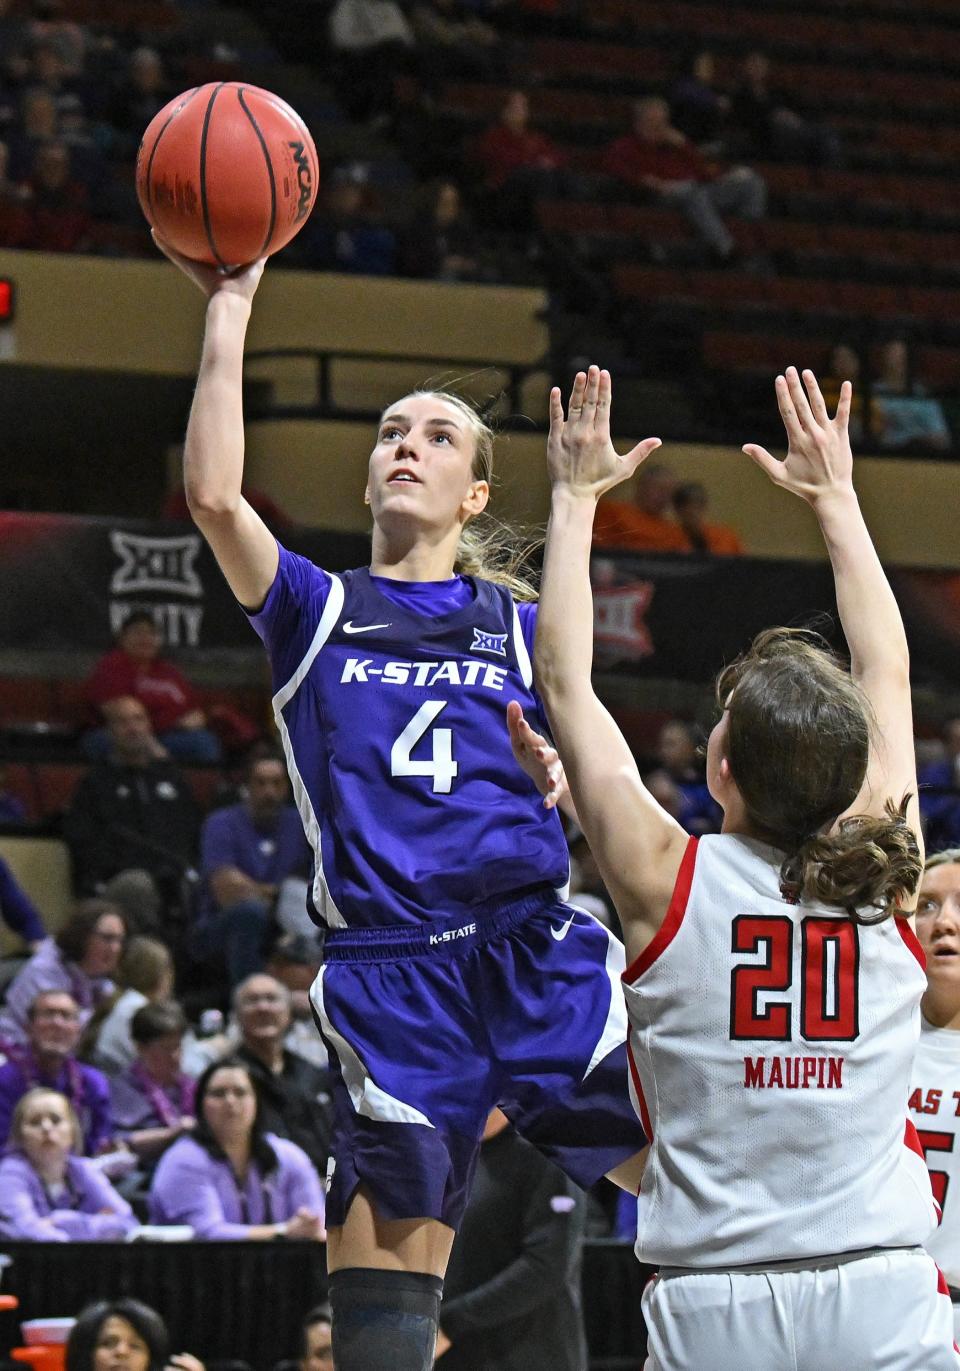 Kansas State guard Serena Sundell (4) shoots over Texas Tech's Bailey Maupin (20) during their Big 12 Tournament game Thursday at Municipal Auditorium. Sundell and the Wildcats will face Wichita State in the first round of the WNIT on Thursday in Manahattan.